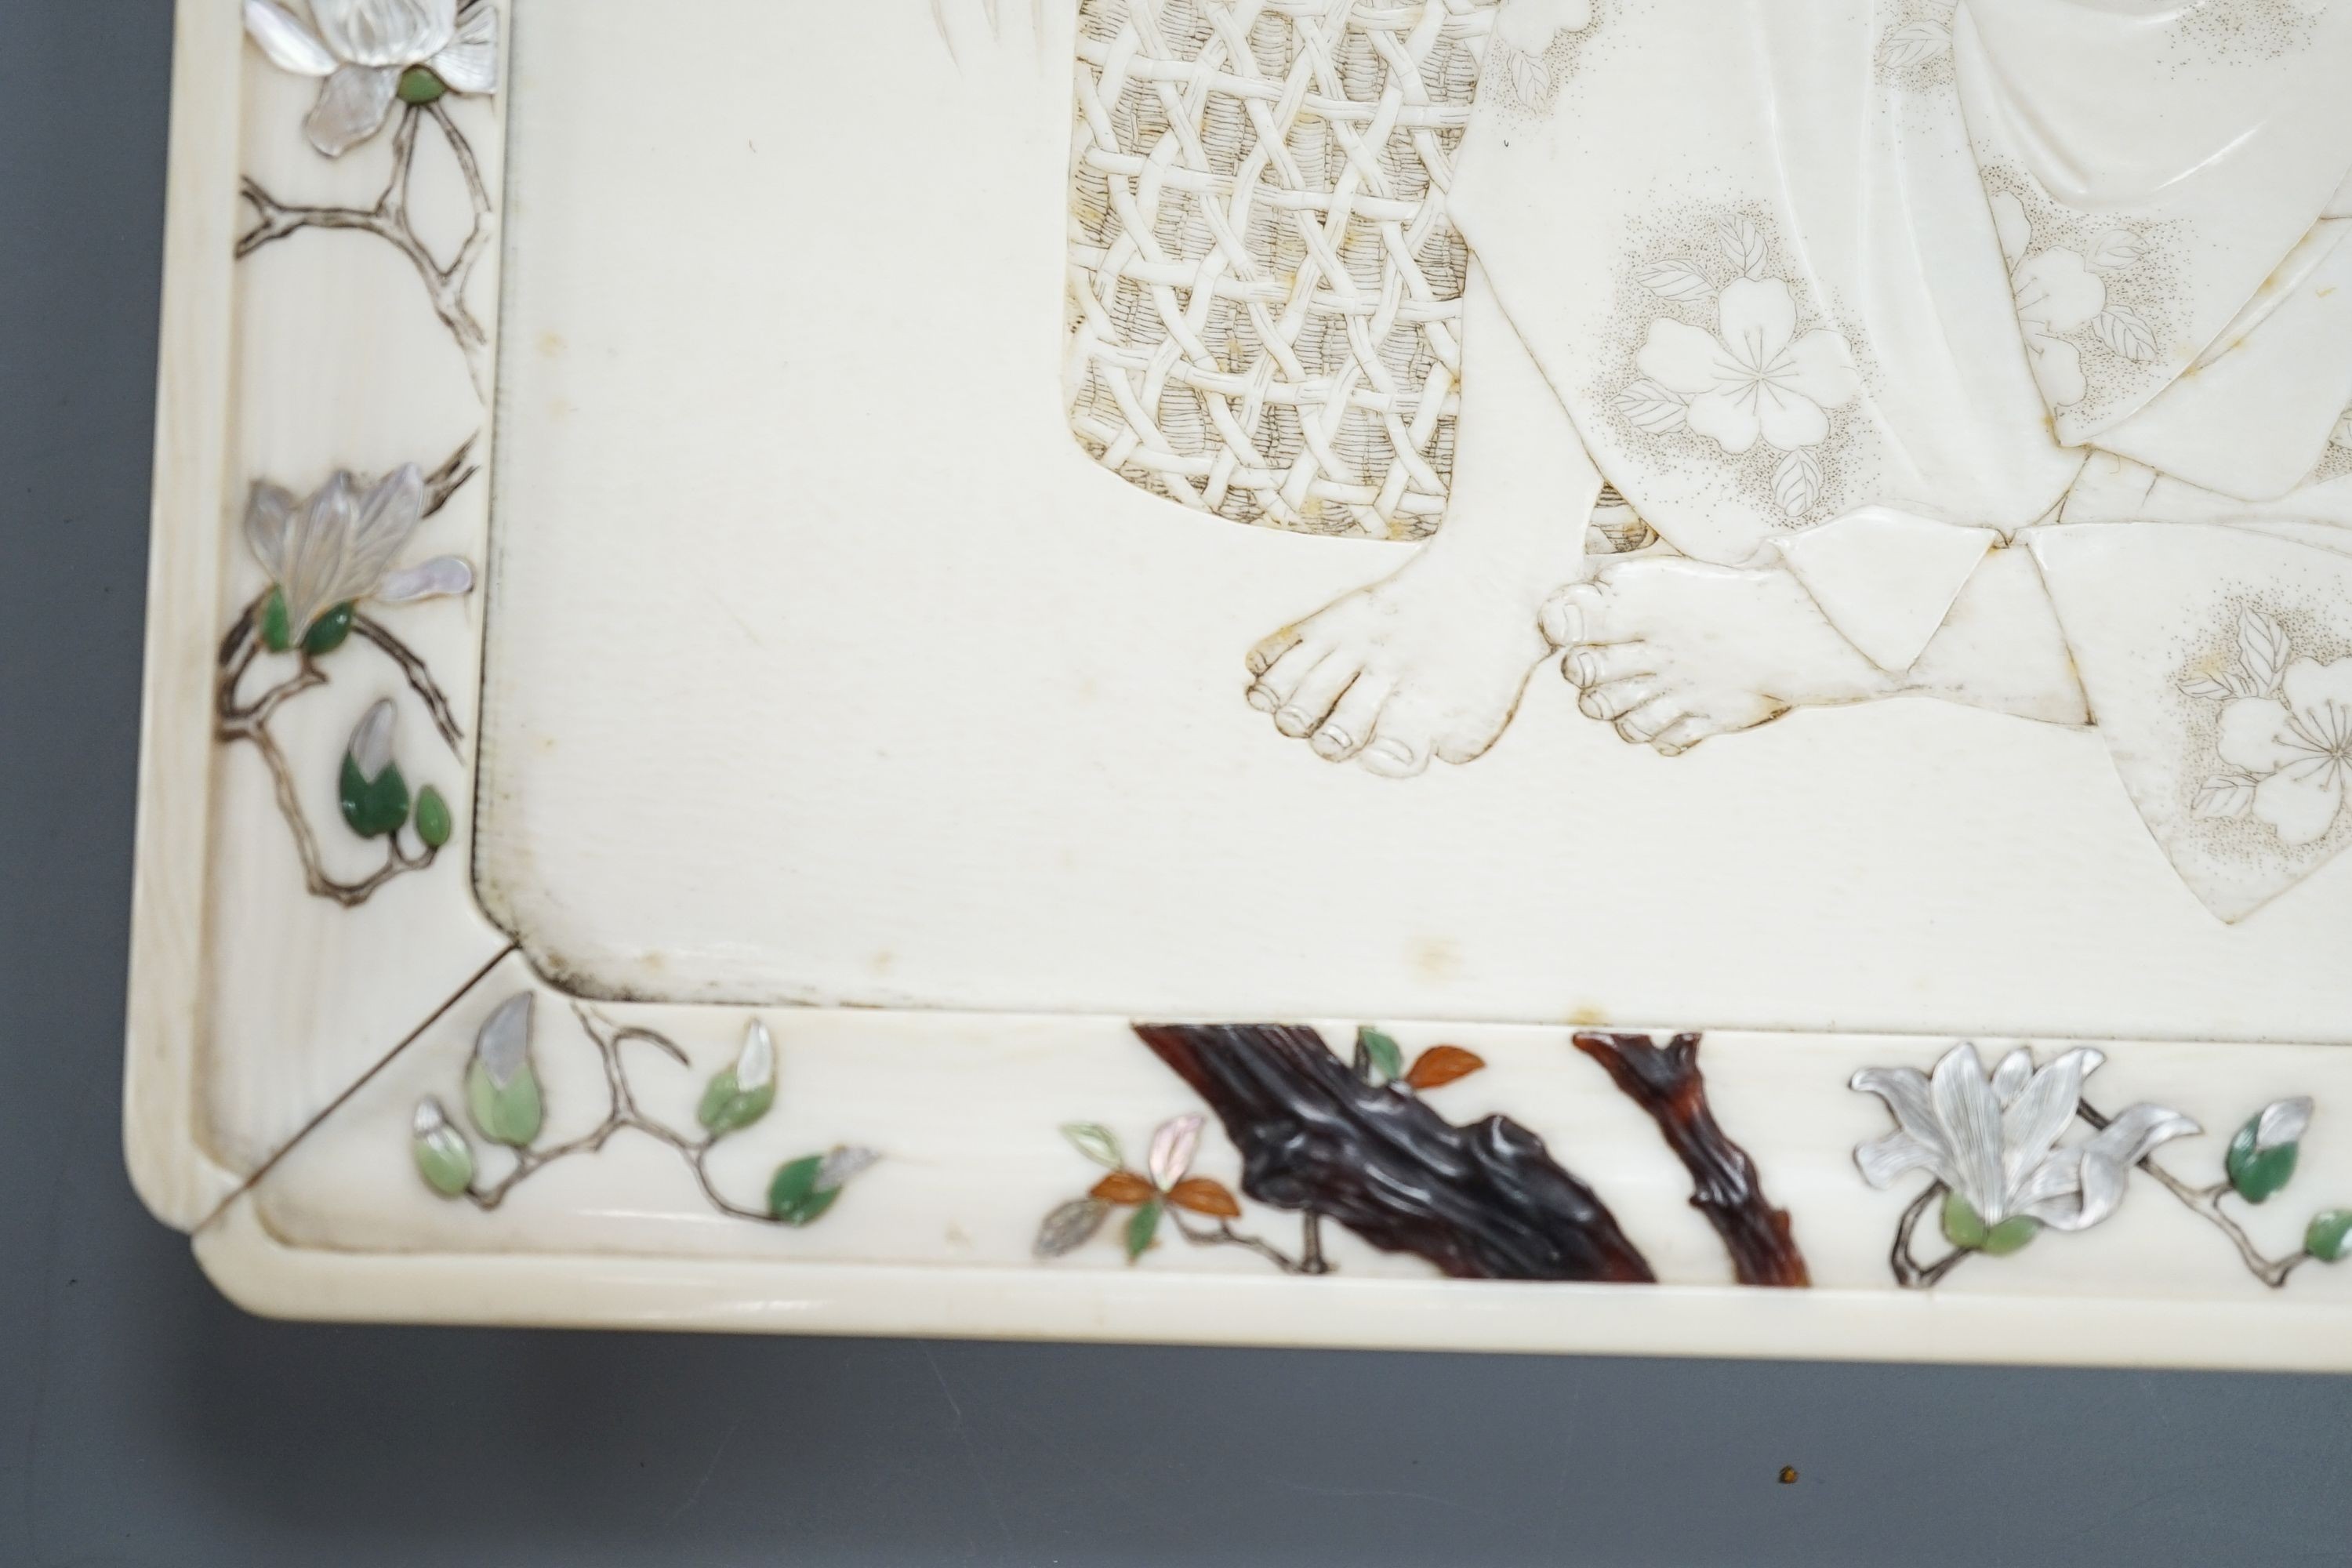 A Japanese ivory tray/plaque, Meiji period, with sunk-in carving of boy with dove, the surround decorated with Shibayama inlaid flowers etc. 15 x 20cm